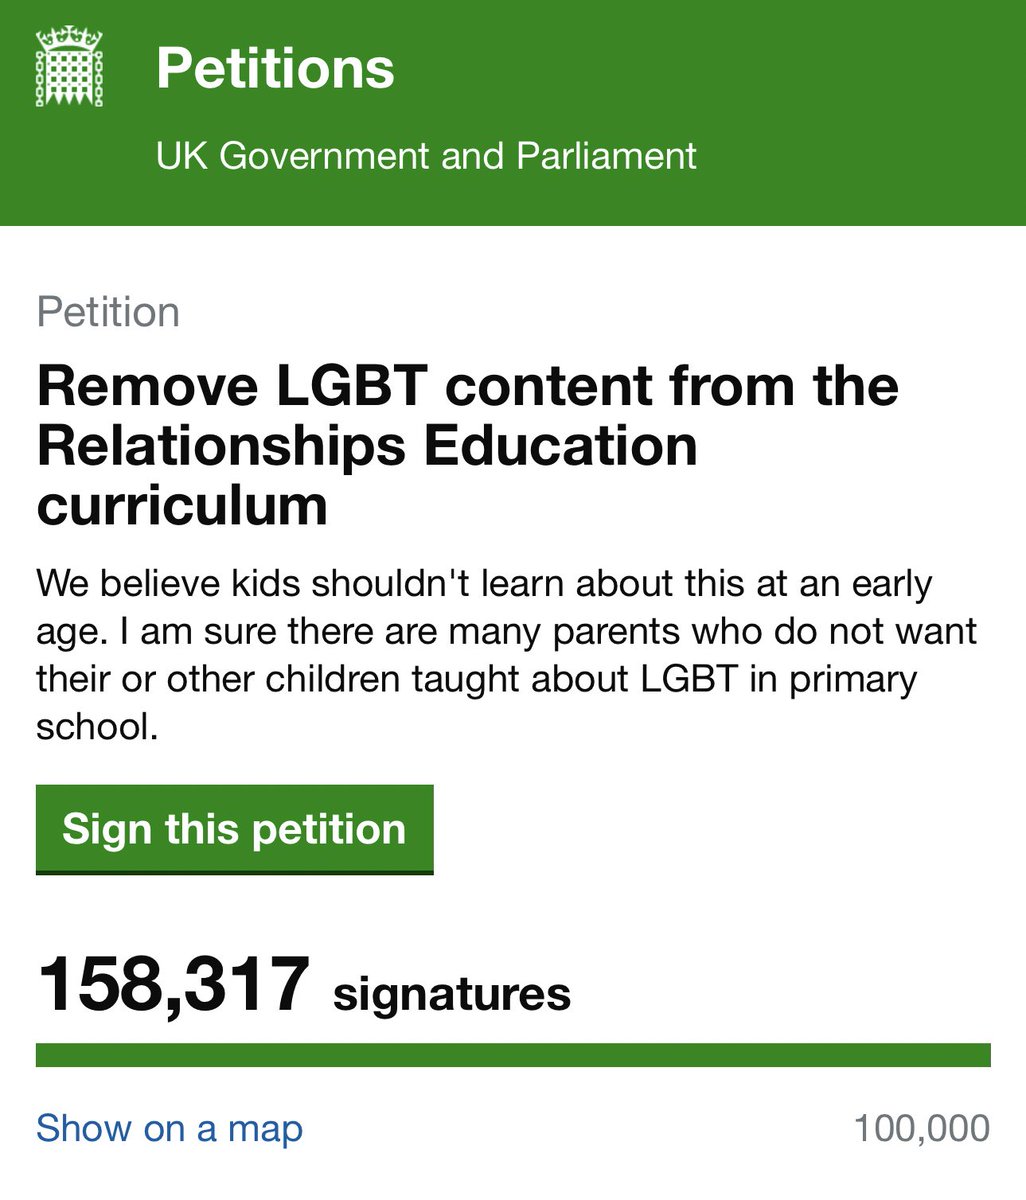 My heart breaks this petition’s even been approved. It’s already passed 100,000 signatures meaning it will be debated. 158,317 bigots so far want another Section 28, they don’t care about us. We must fight this. Education is key to secure a better future for us all. #LGBT 🏳️‍🌈🏳️‍⚧️